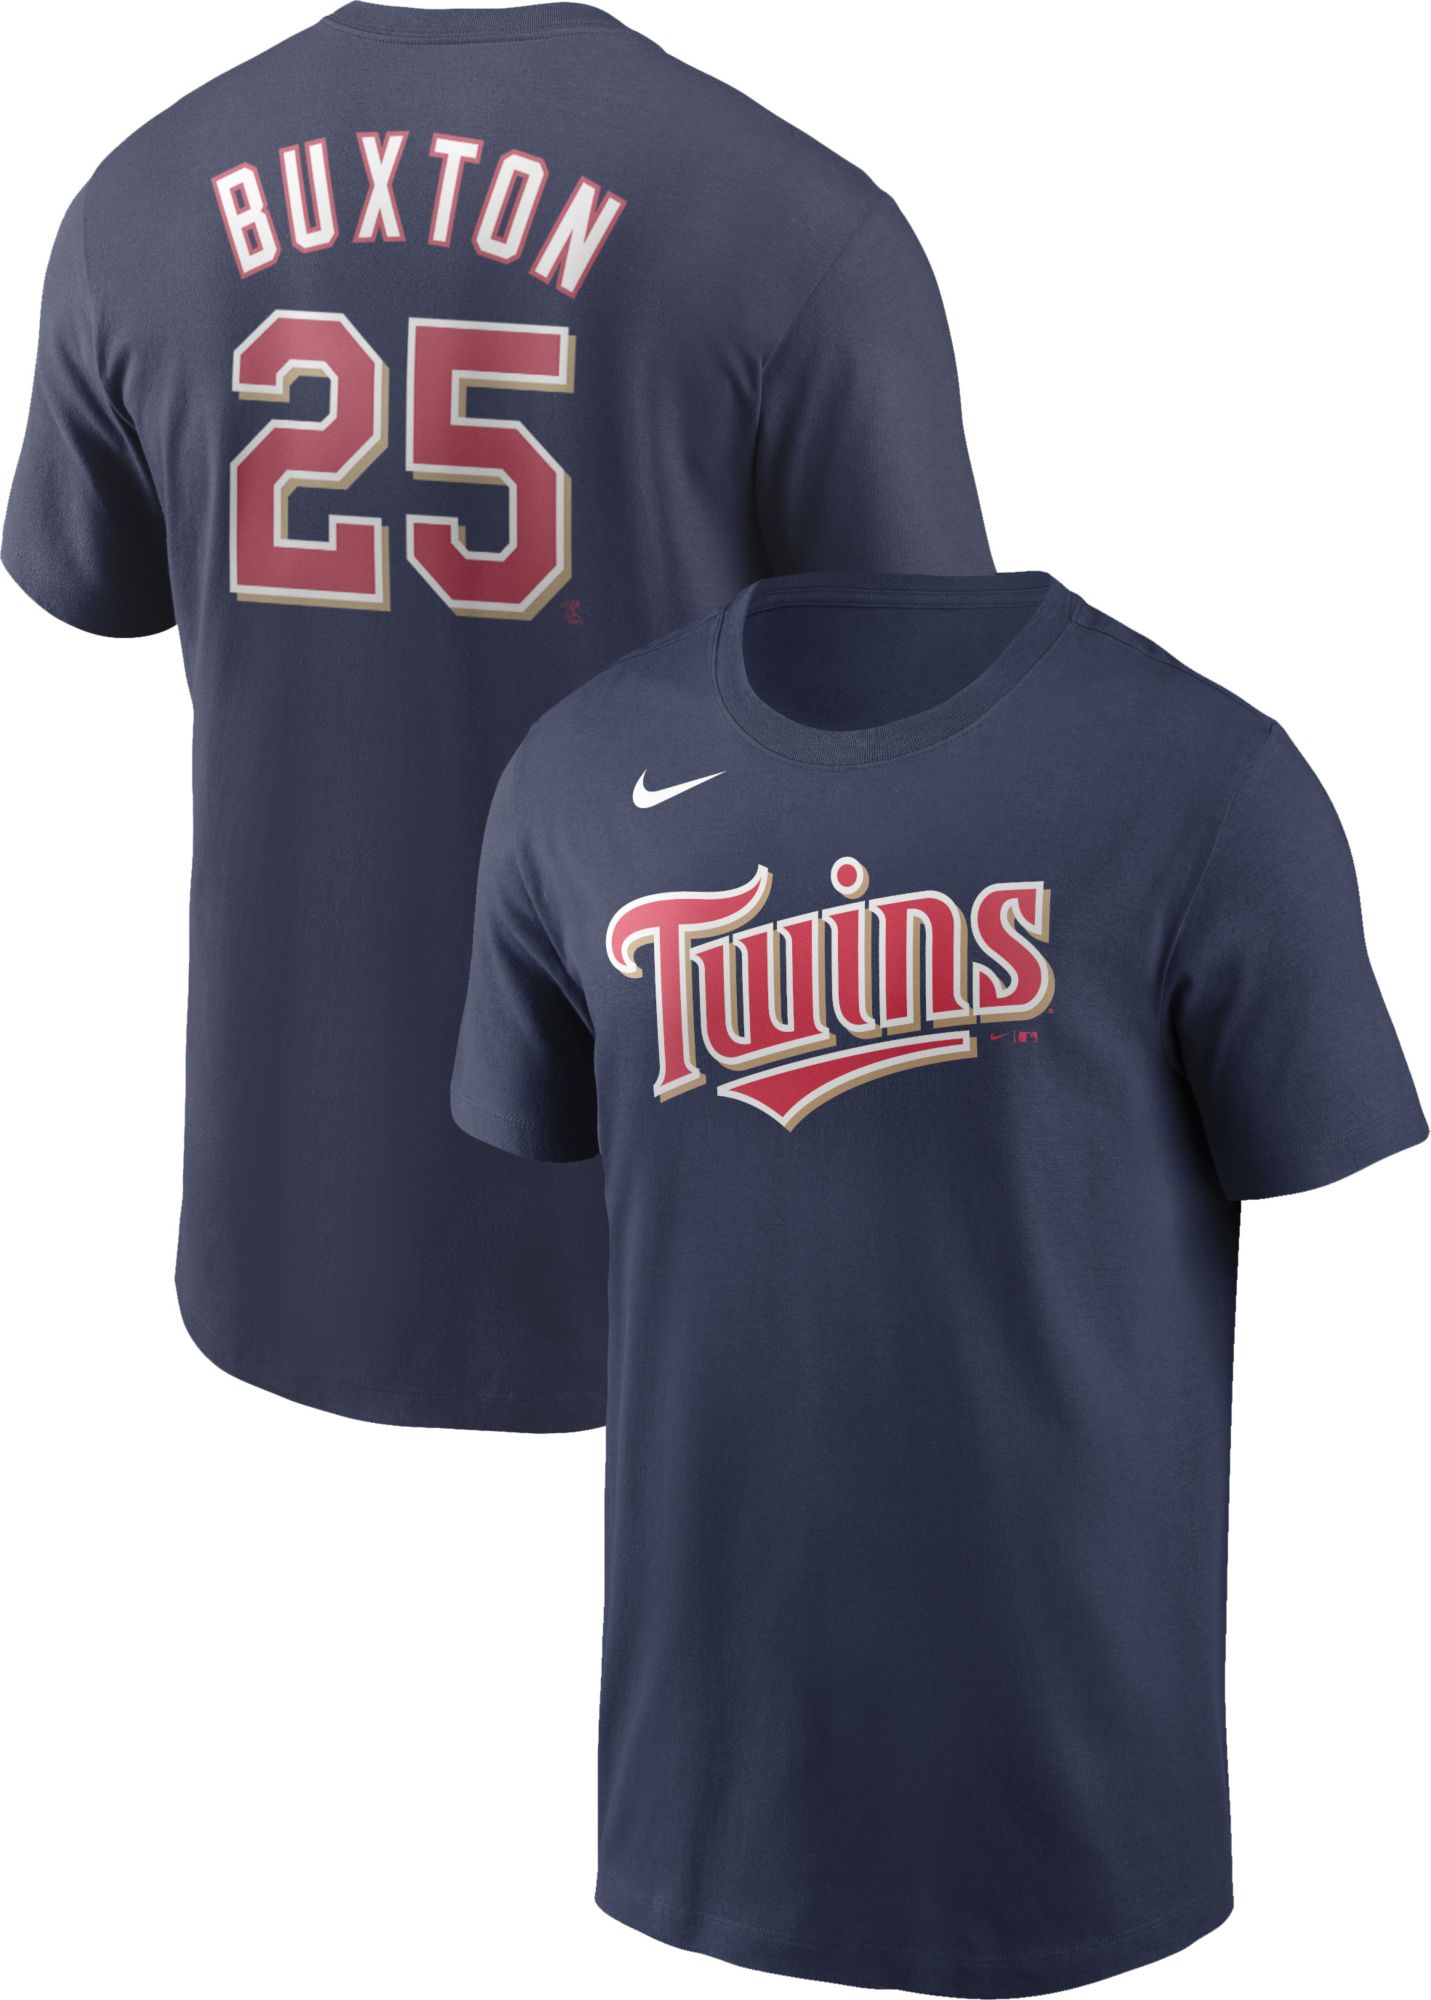 byron buxton jersey for sale